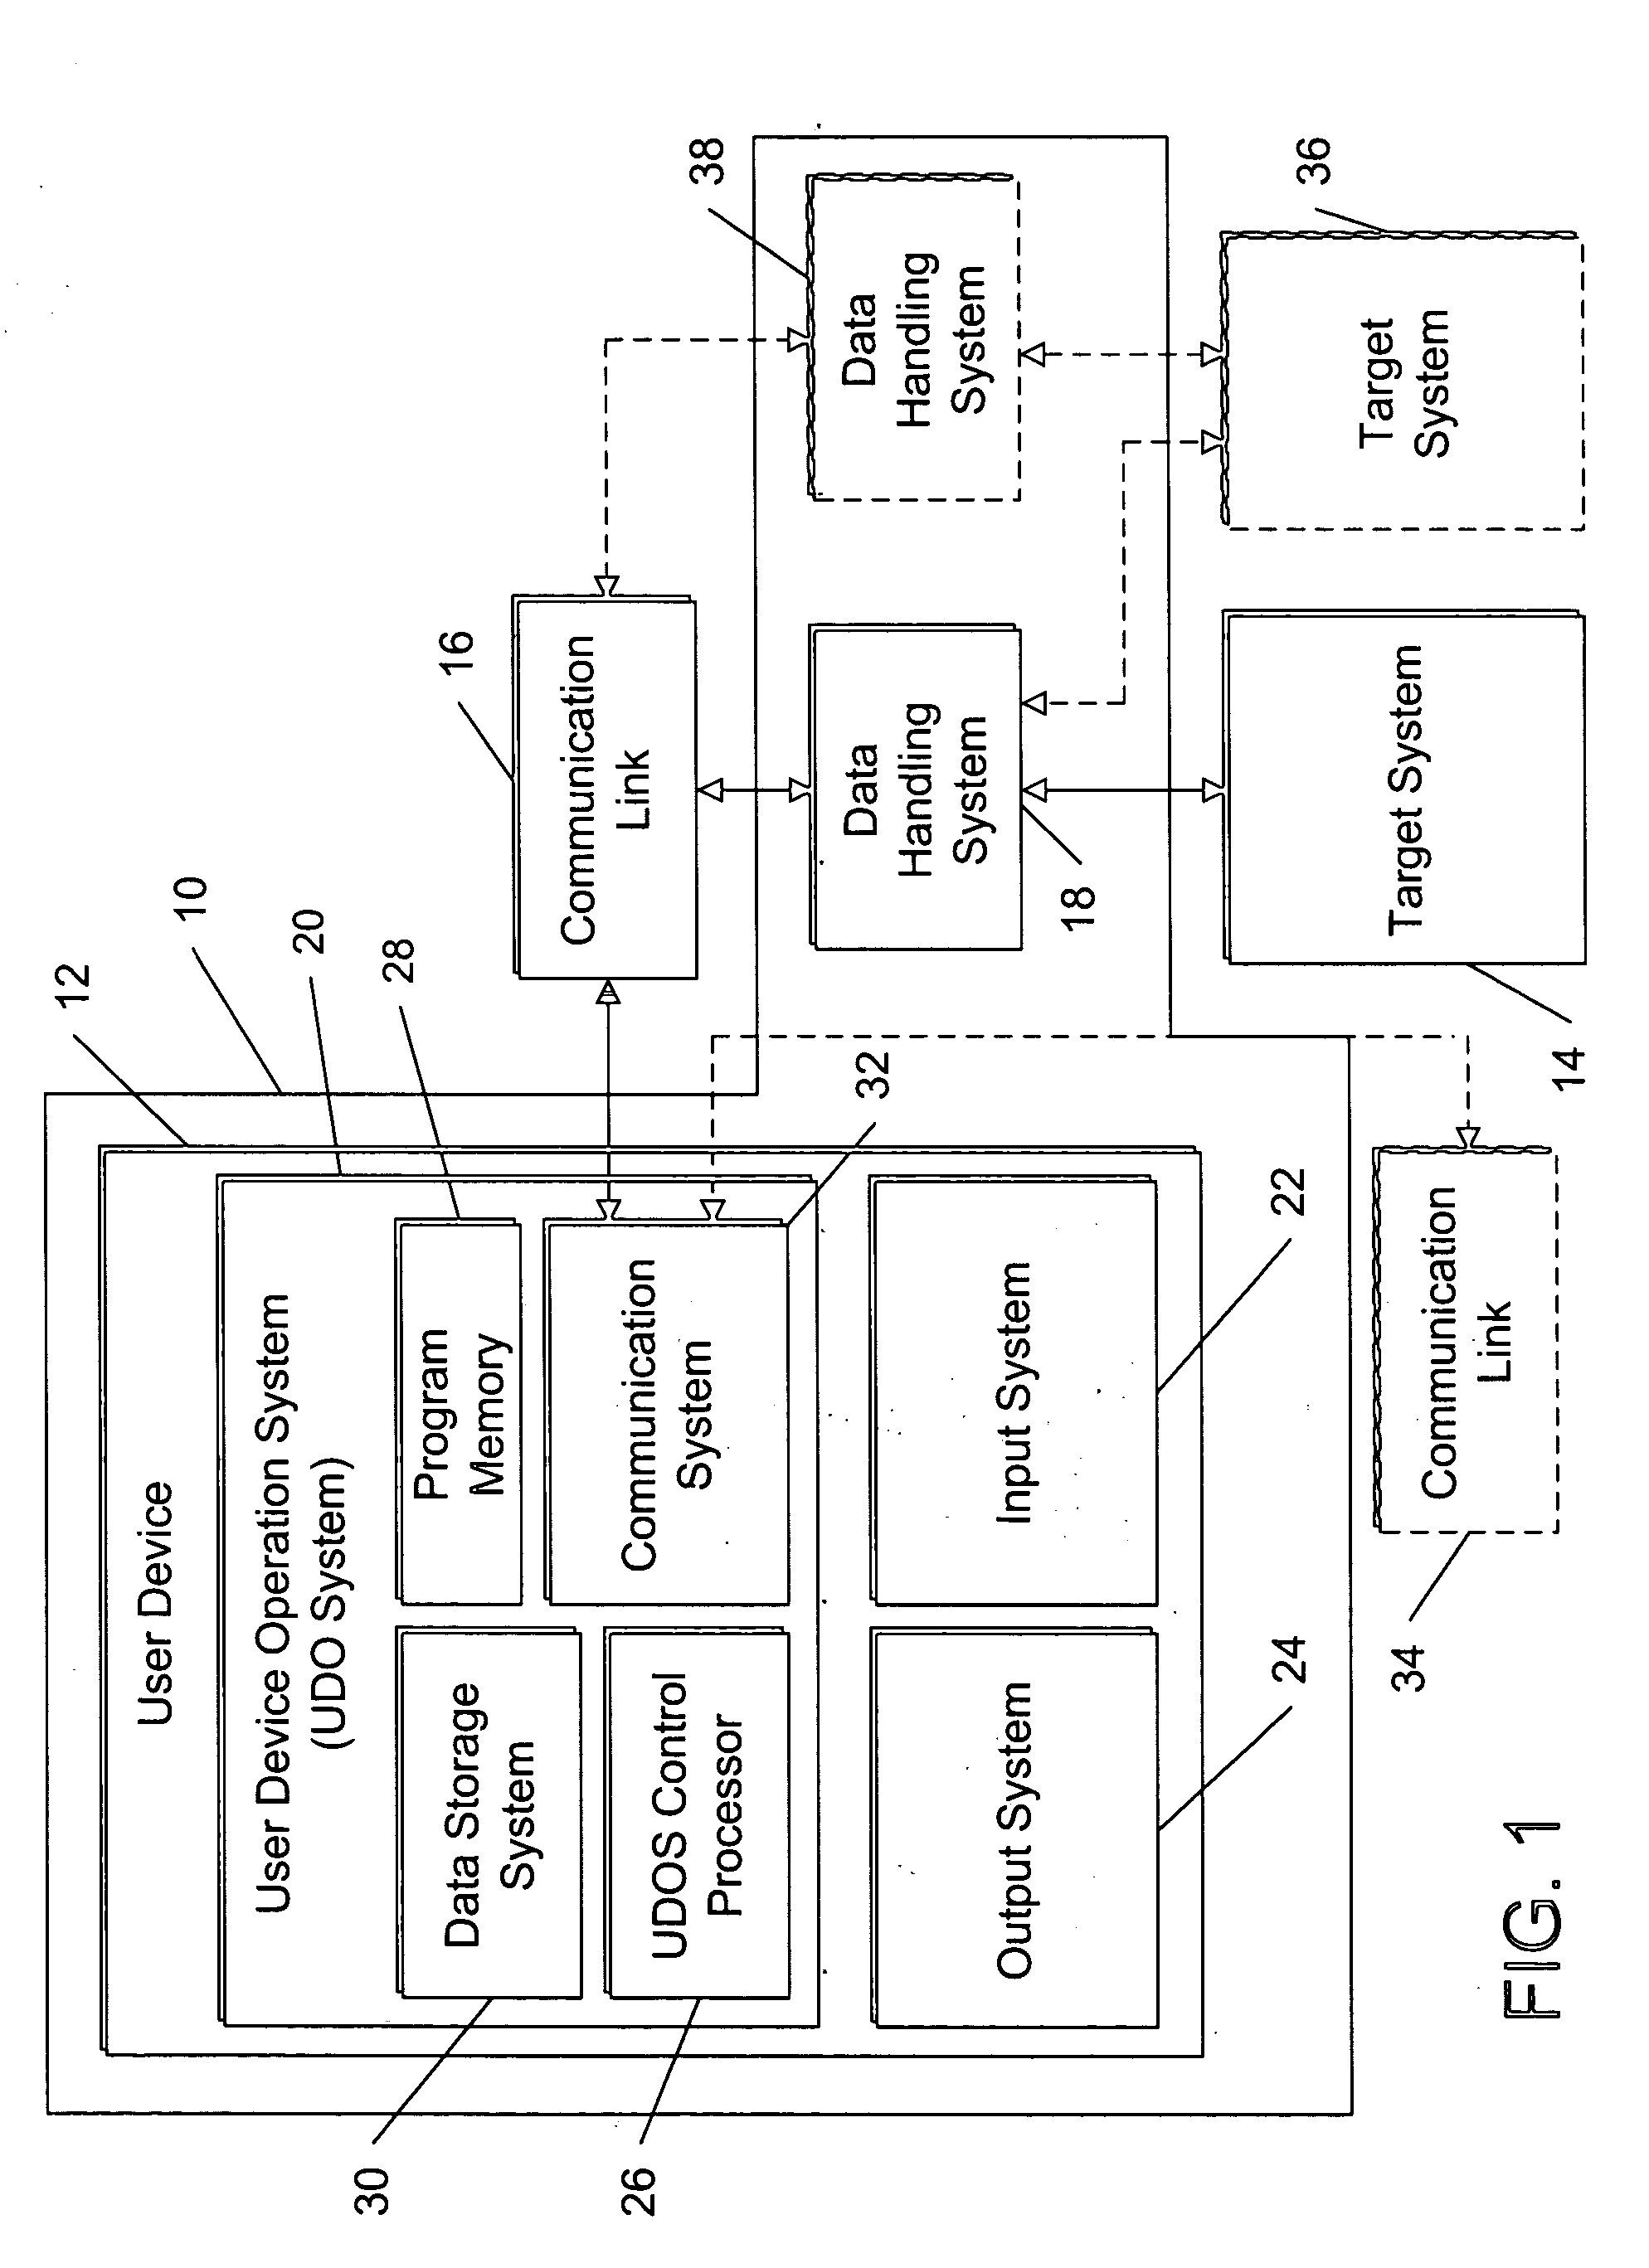 System and method for real-time configurable monitoring and management of task performance systems